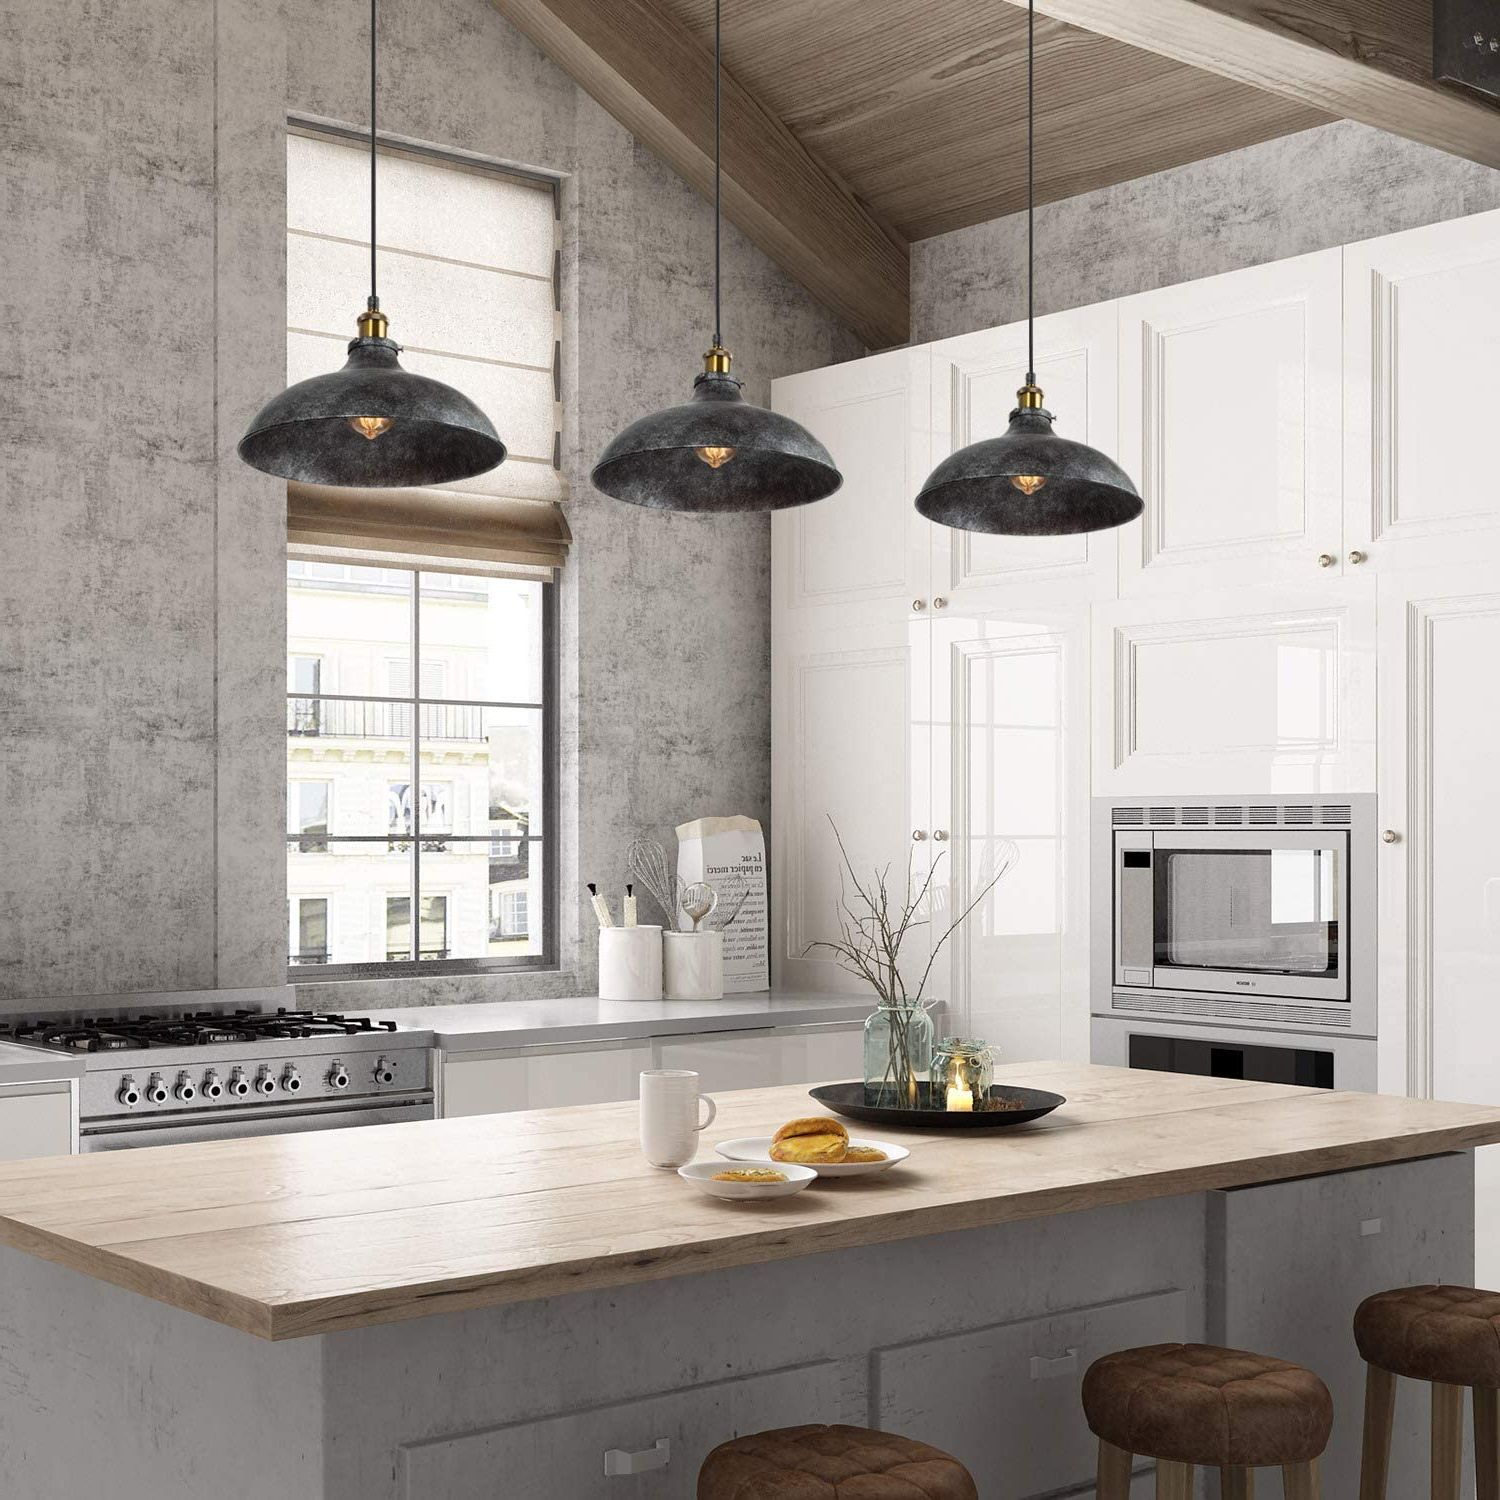 Favorite Kitchen Island Light Chandeliers With Lnc Pendant Lighting For Kitchen Island Industrial Big (View 1 of 15)